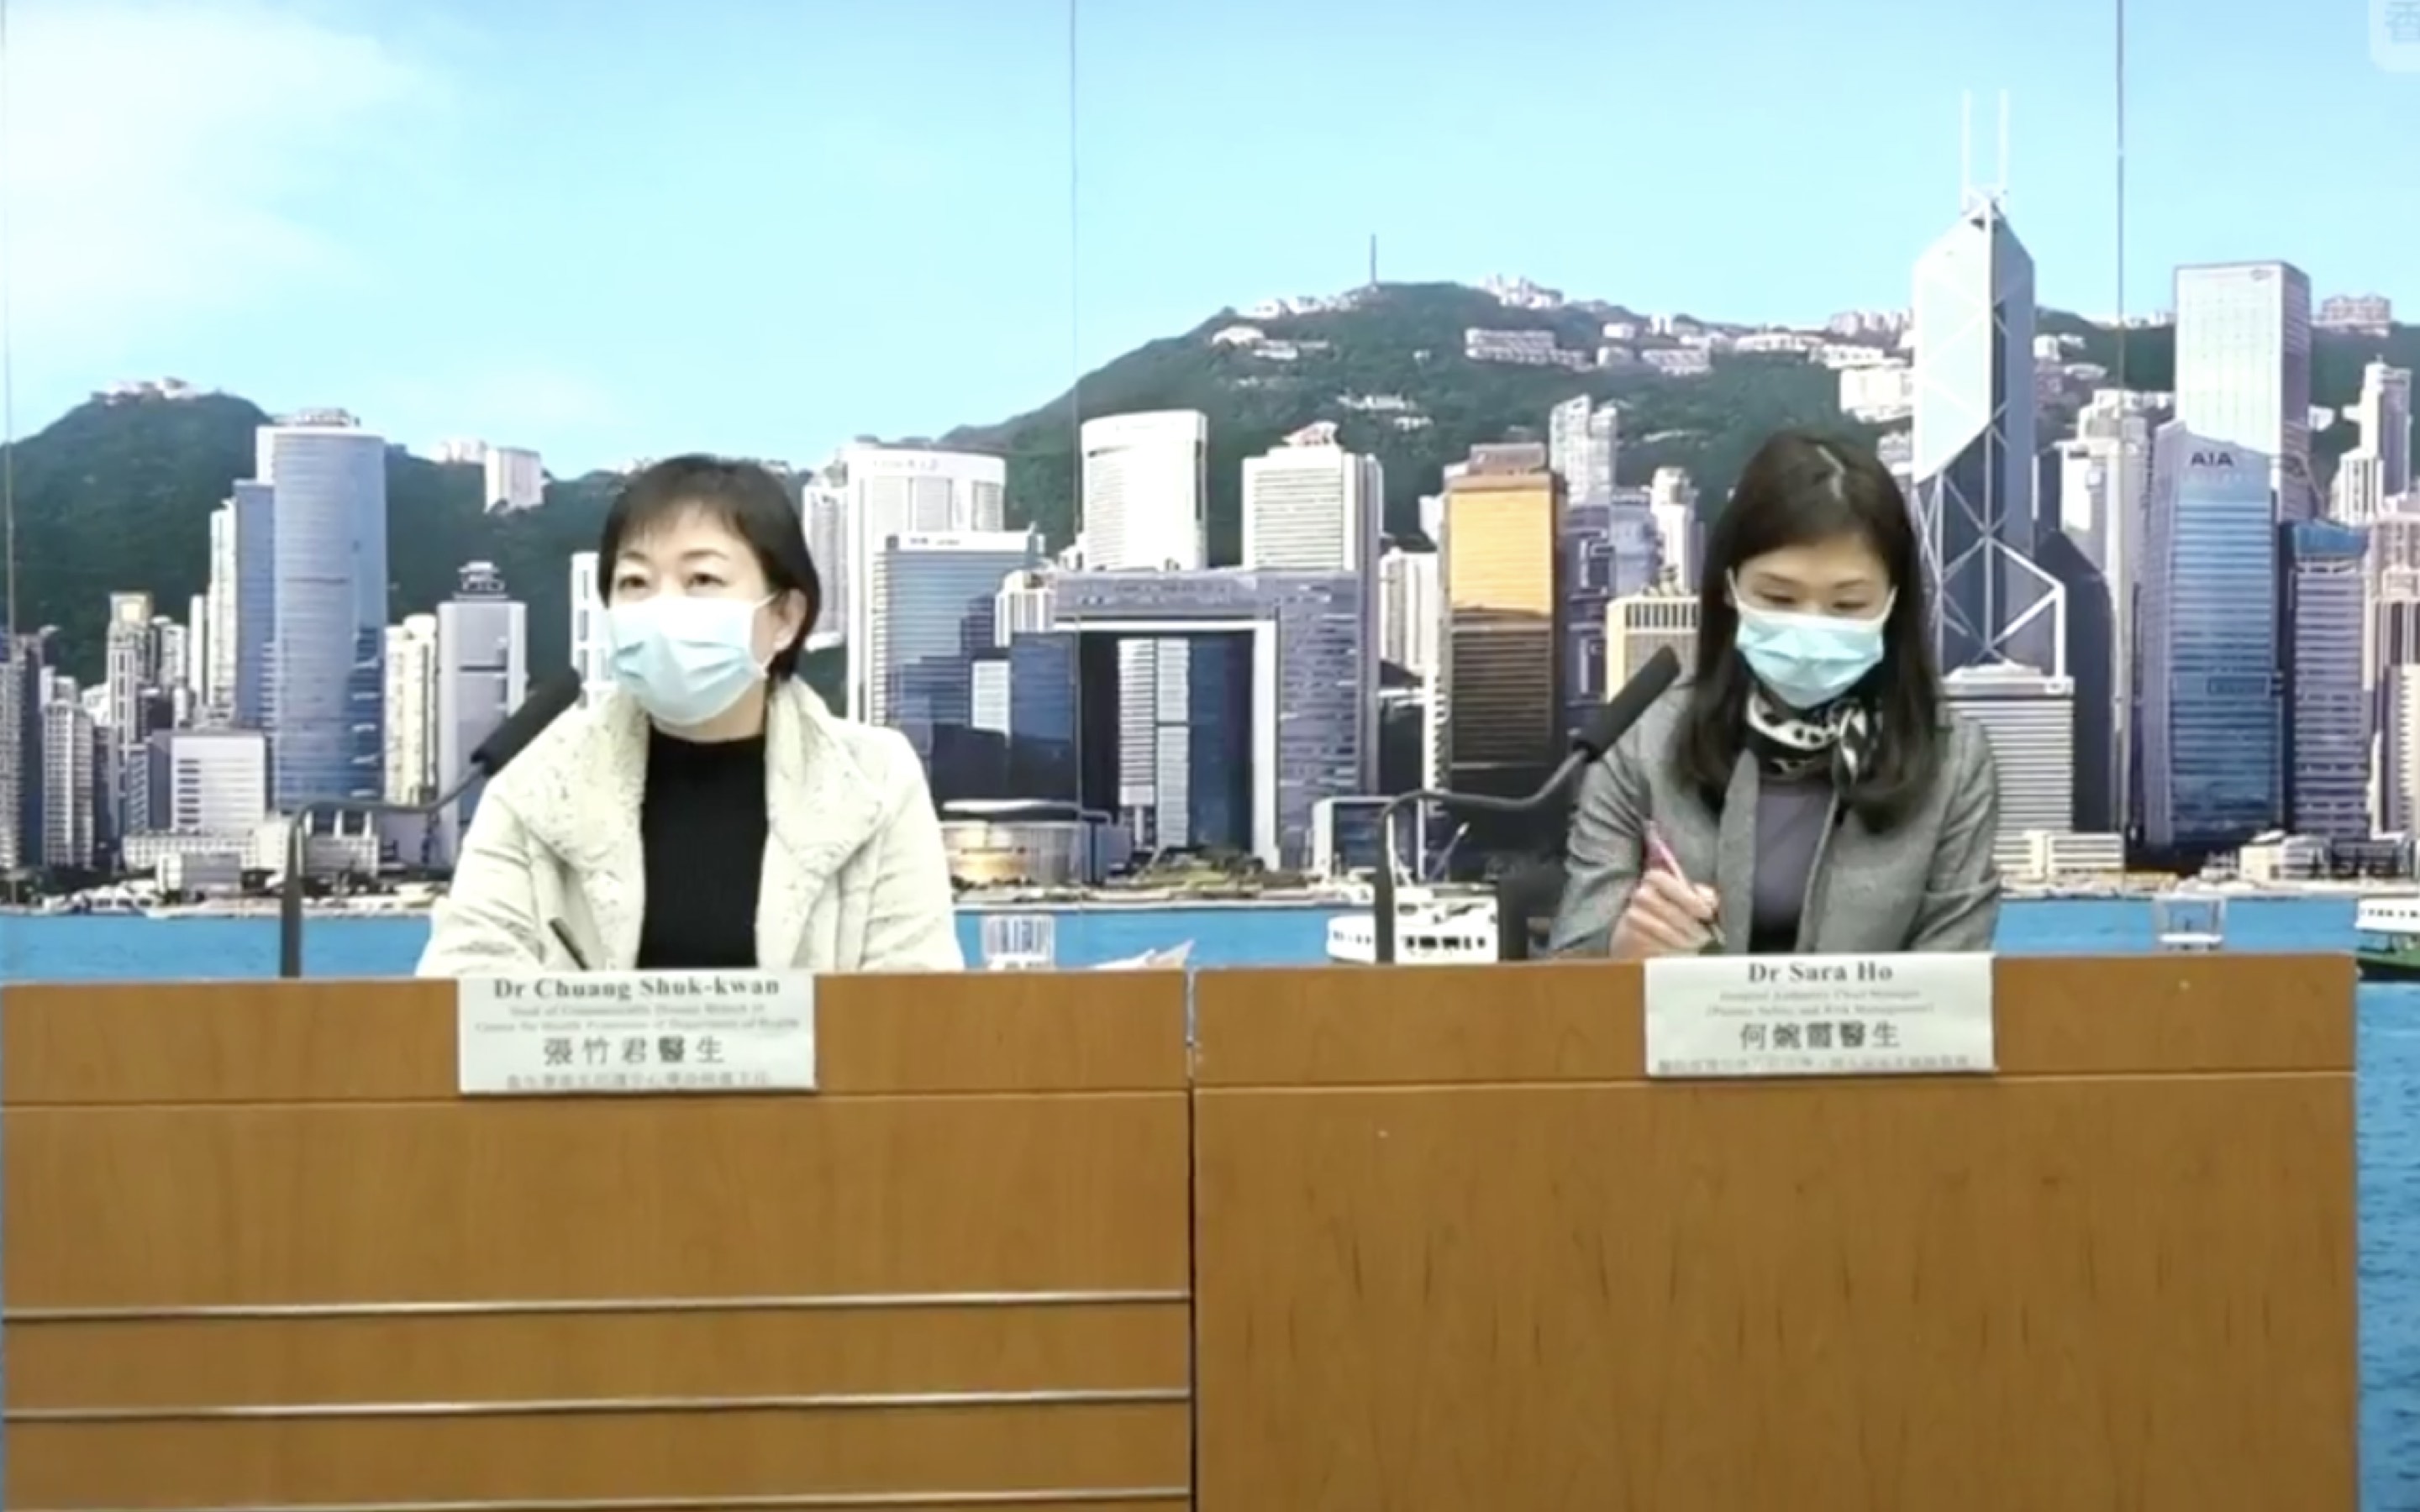 Head of the communicable disease branch of the Centre for Health Protection Chuang Shuk-kwan, and Hospital Authority’s chief manager for patient safety and risk management Dr Sara Ho. Screengrabs via Facebook video/RTHK.